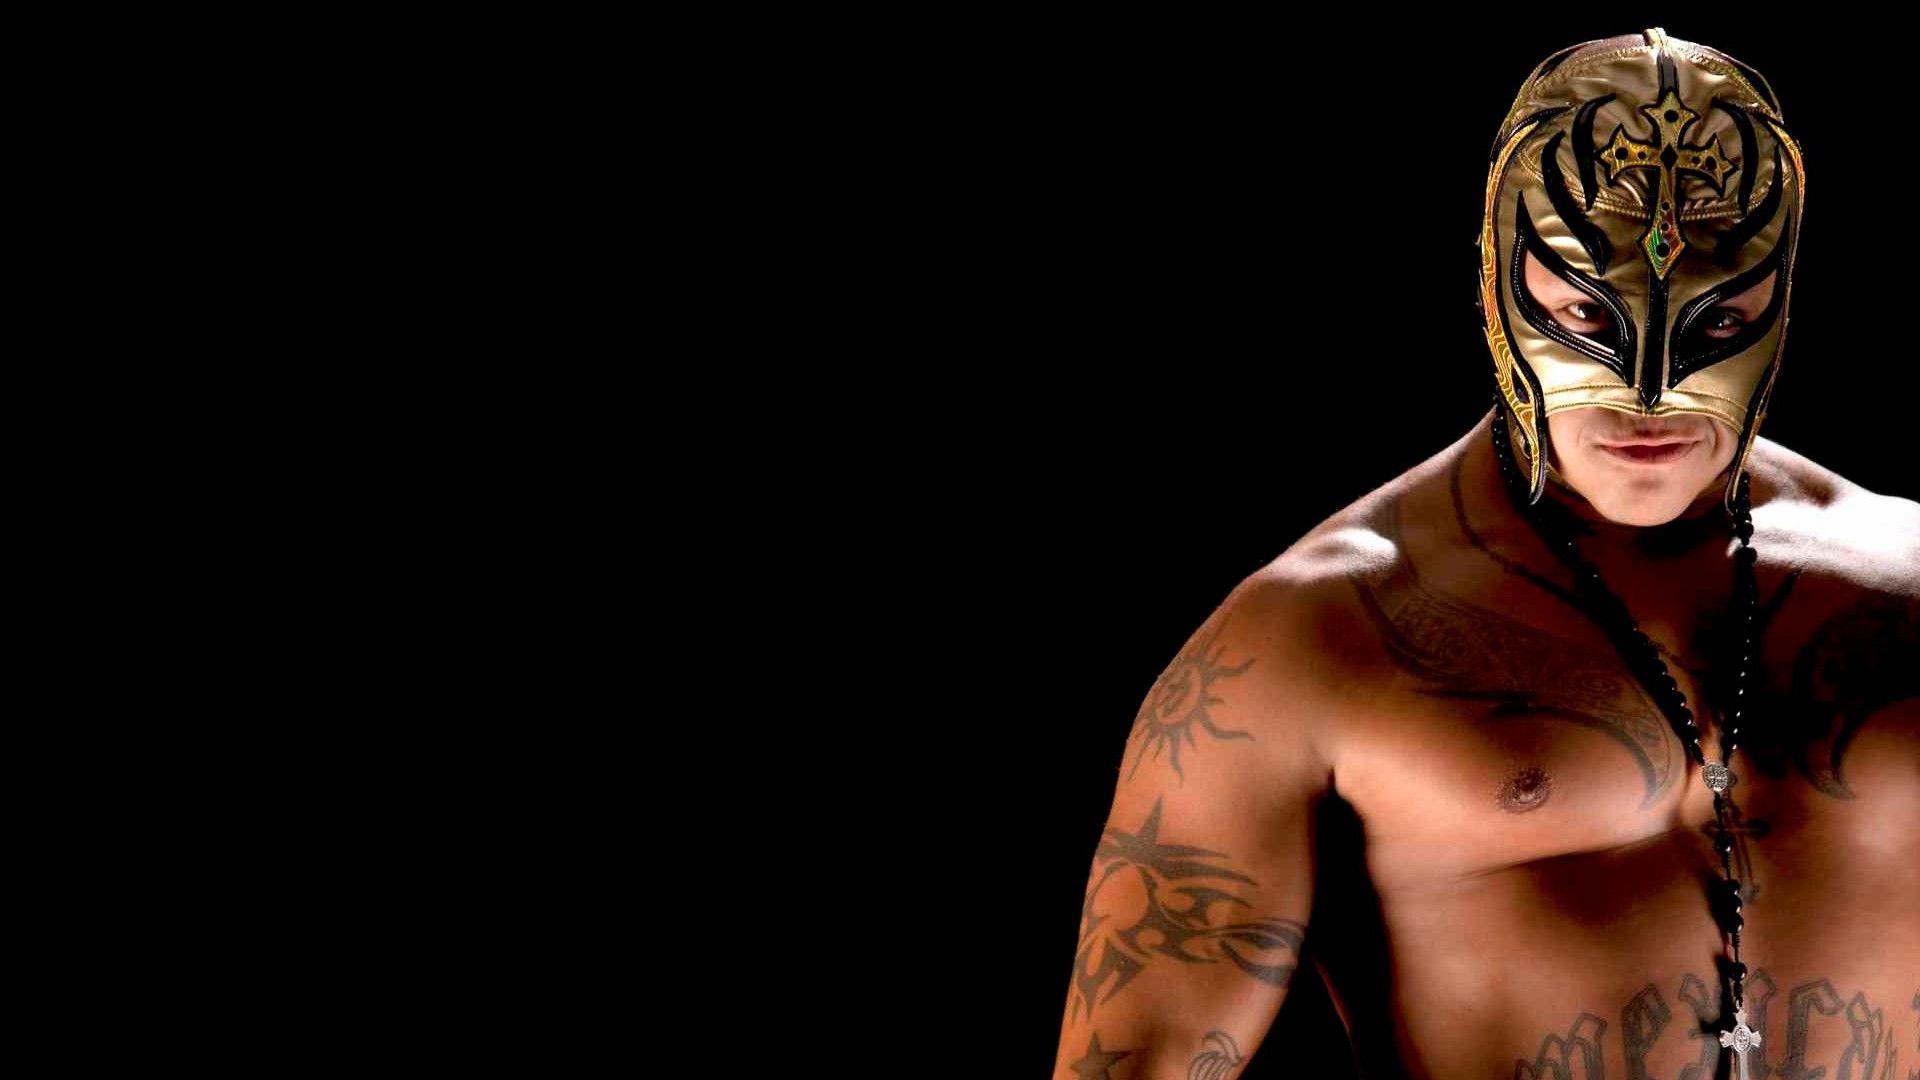 Top WWE Wrestler Rey Mysterio HD Wallpaper image Collection